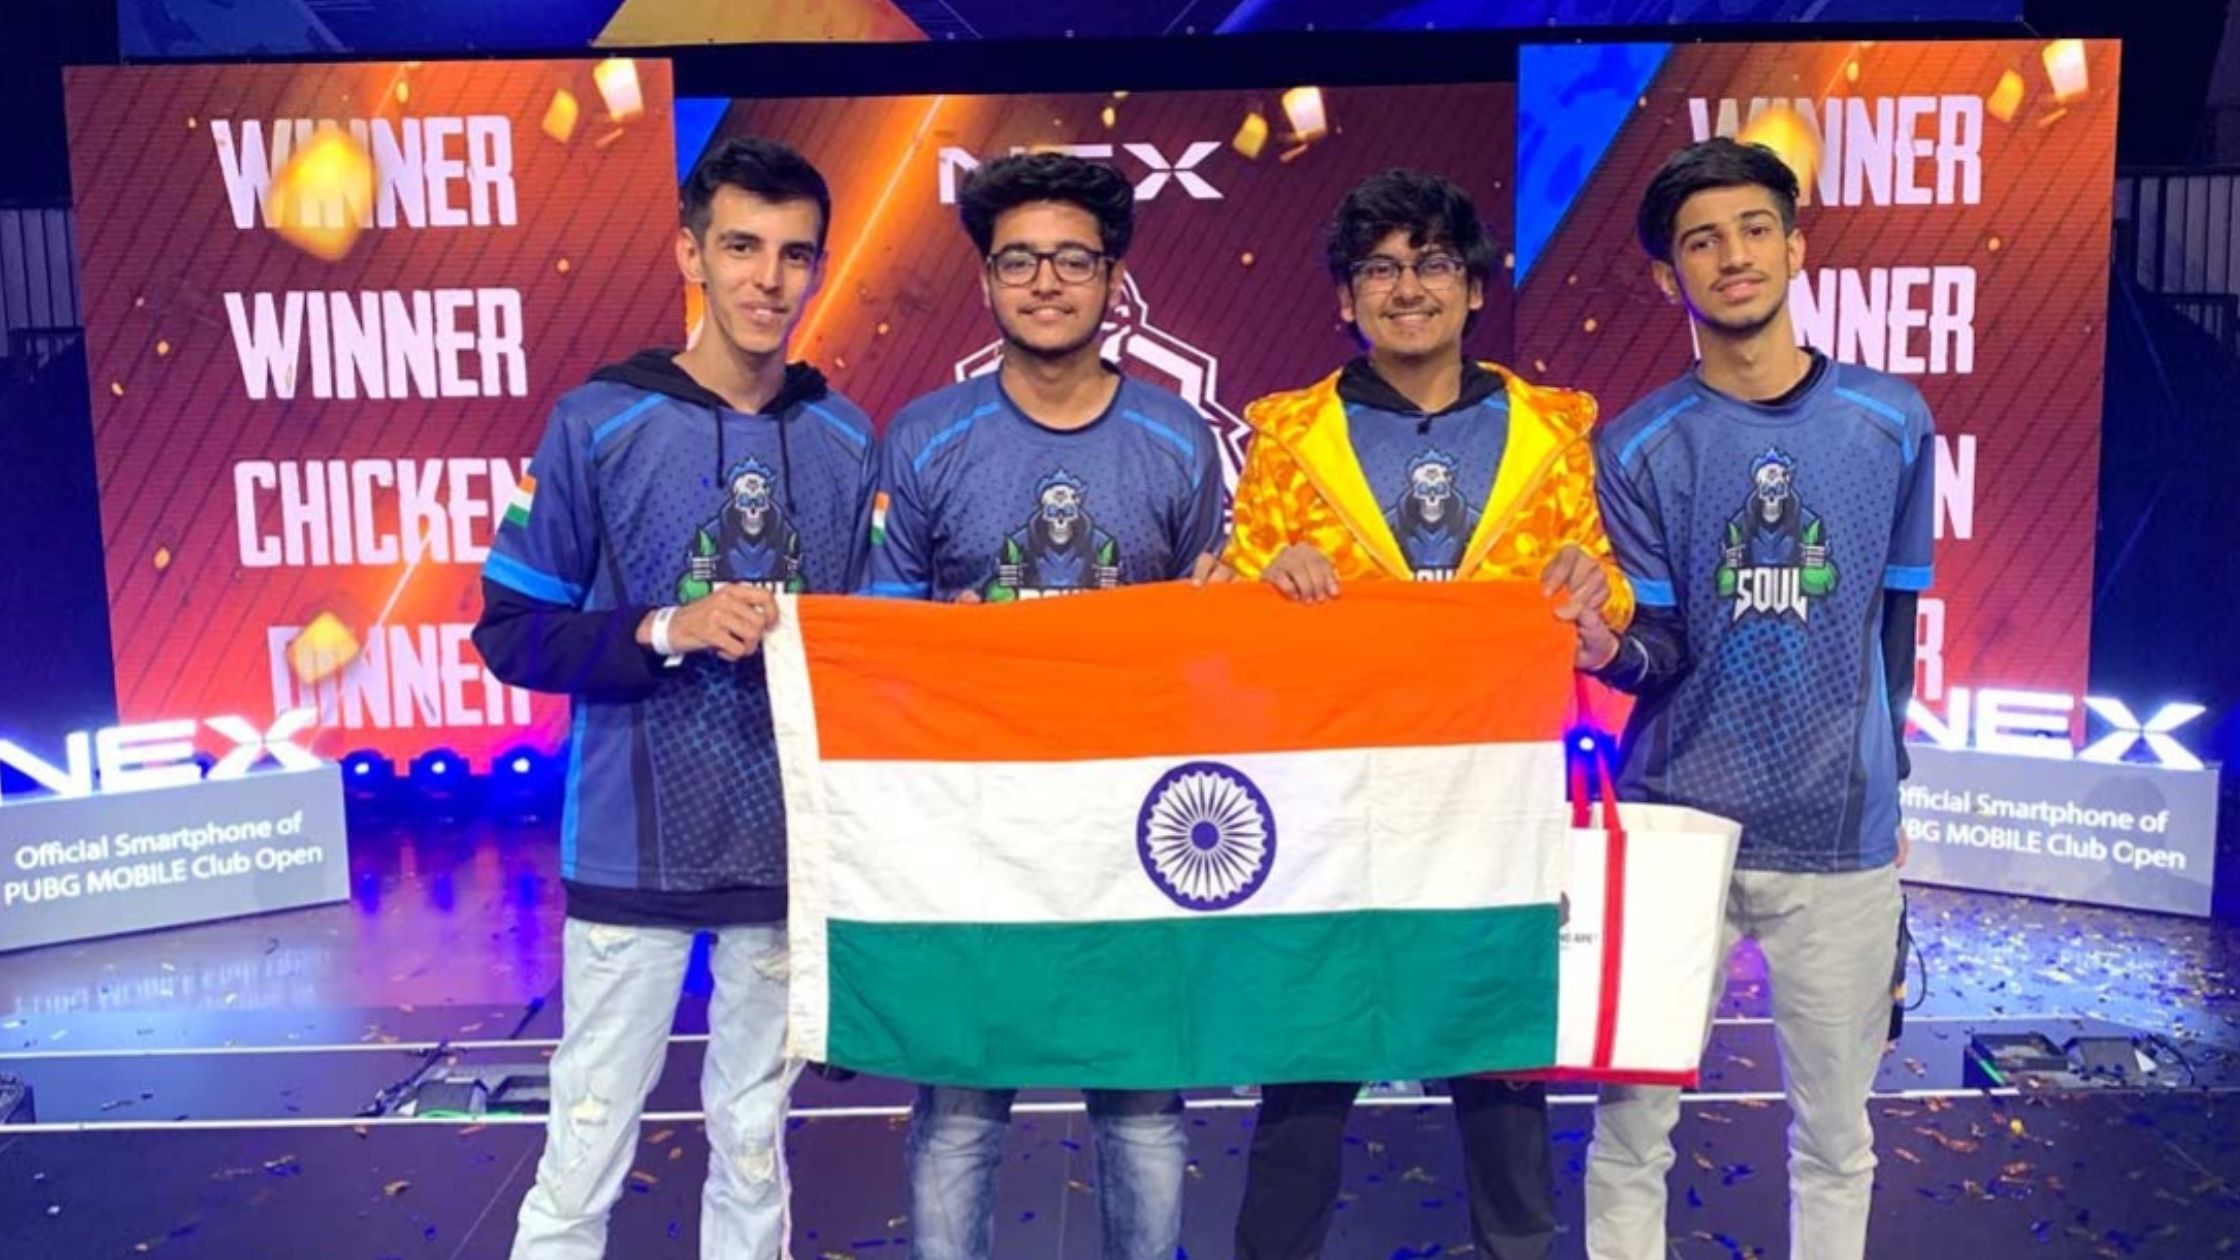 esports-in-india-indian-government-officially-recognizes-esports-as-a-multi-sports-event